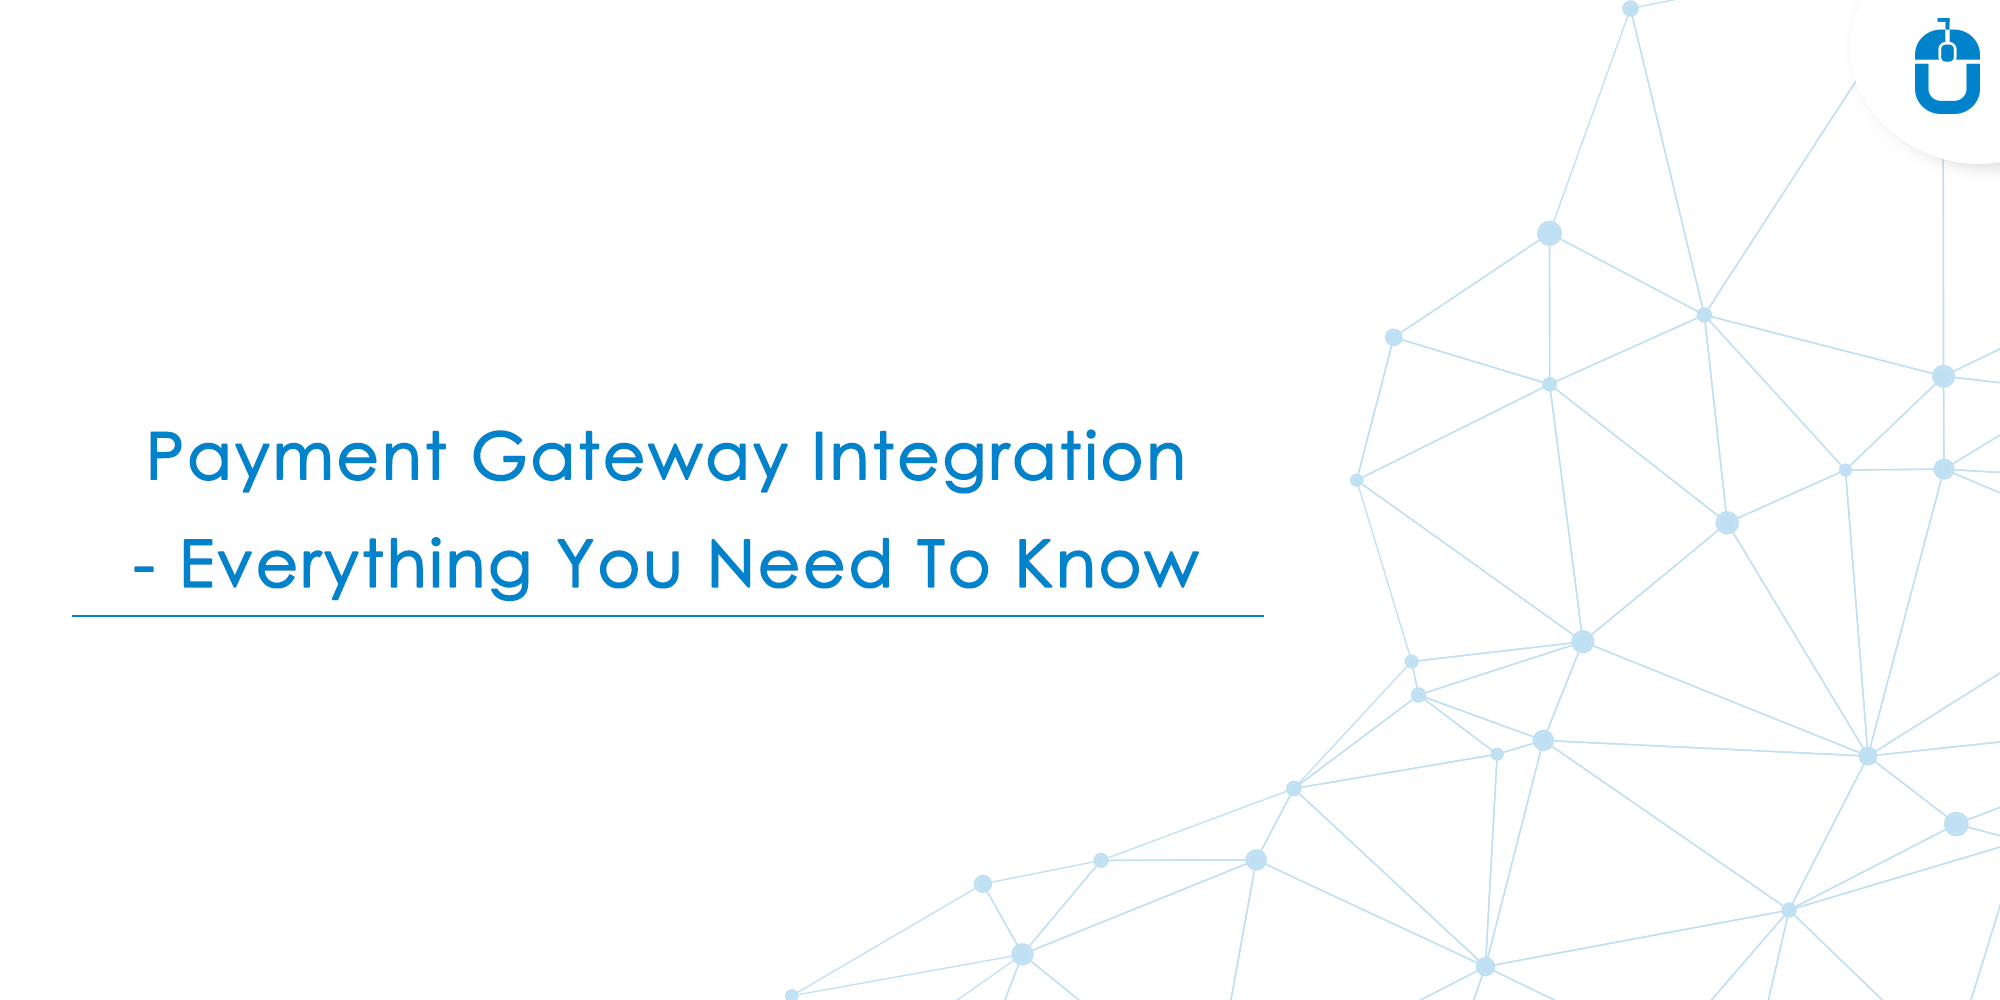 Payment Gateway Integration – Everything You Need To Know